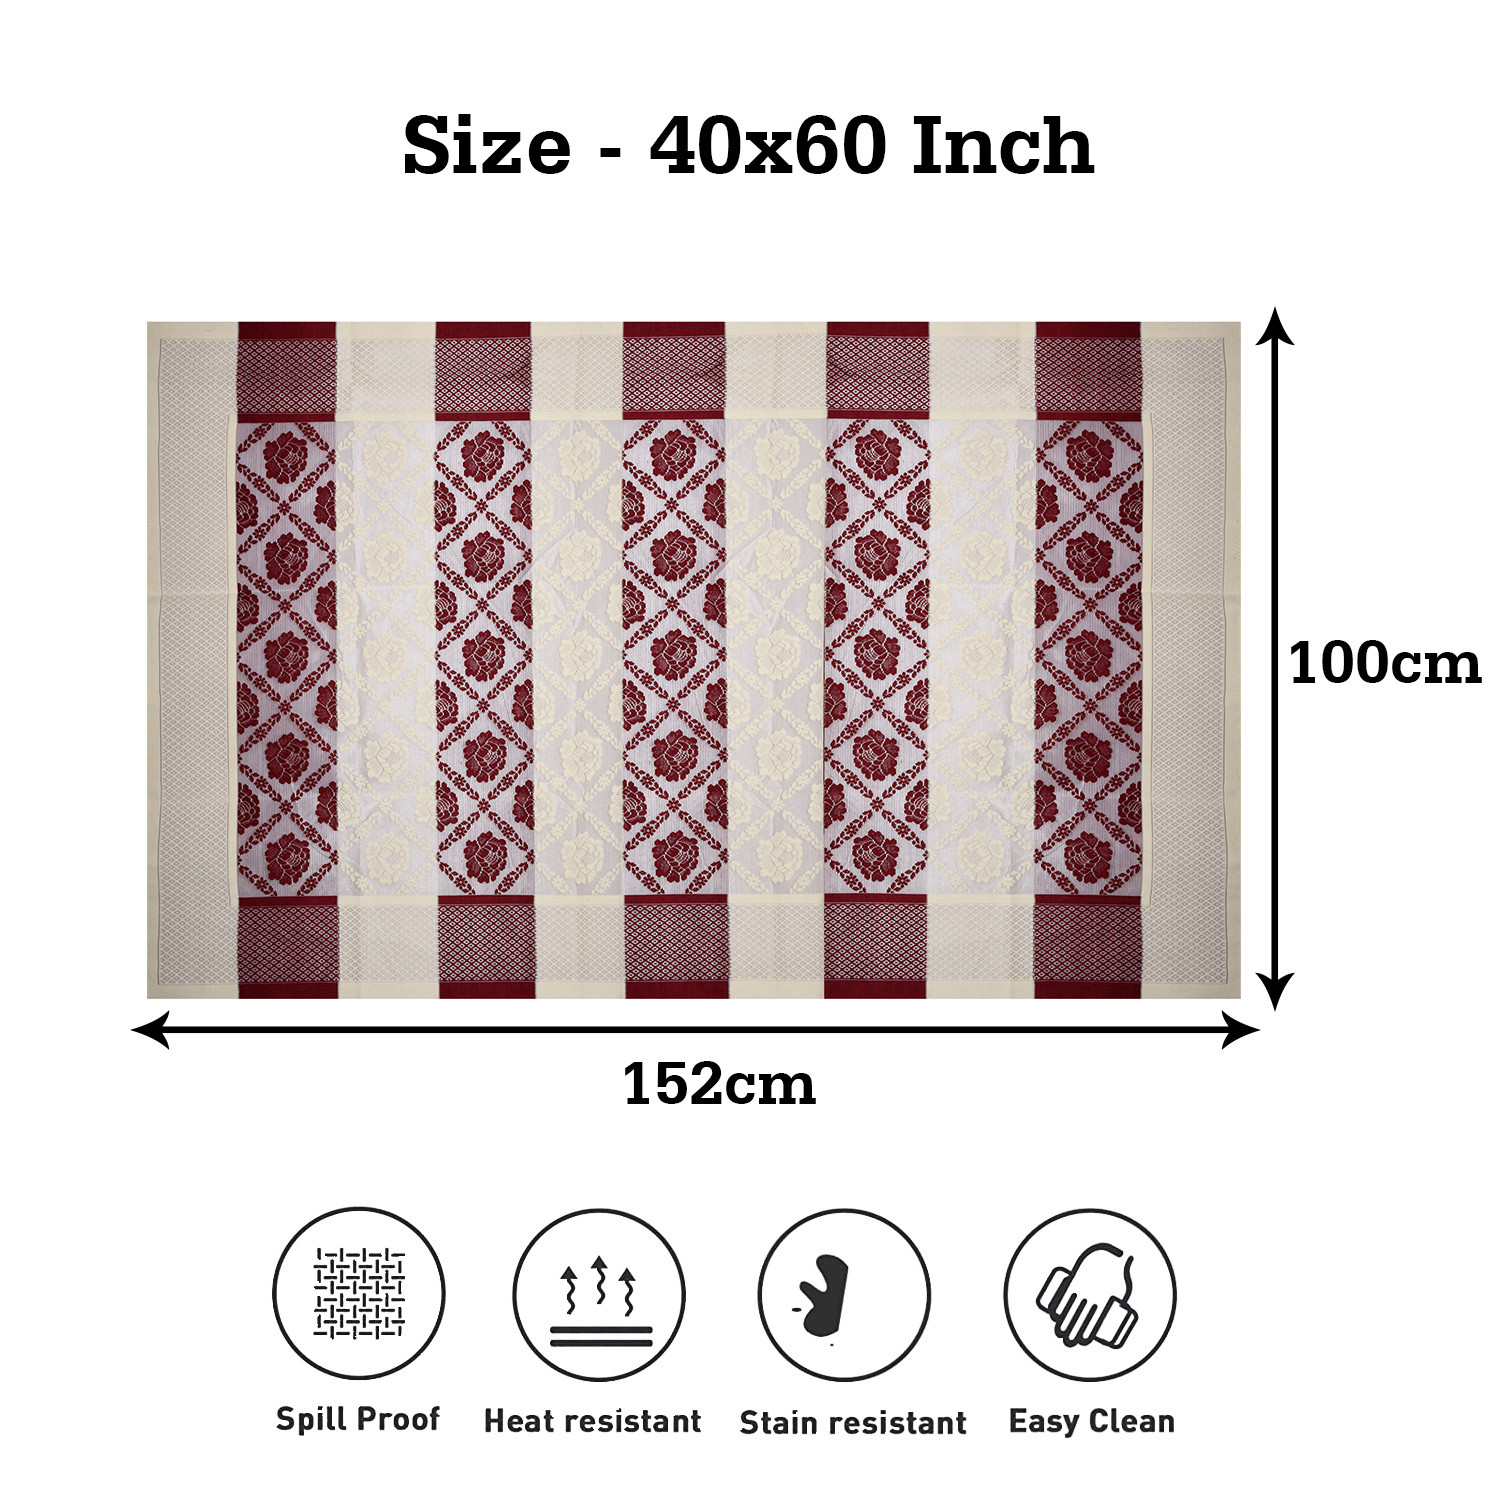 Kuber Industries Center Table Cover|Net Table Cloth Dust-Proof Table Cover|Cotton Flower Patta Design Table Cover|40x60 Inch (Maroon & Cream)